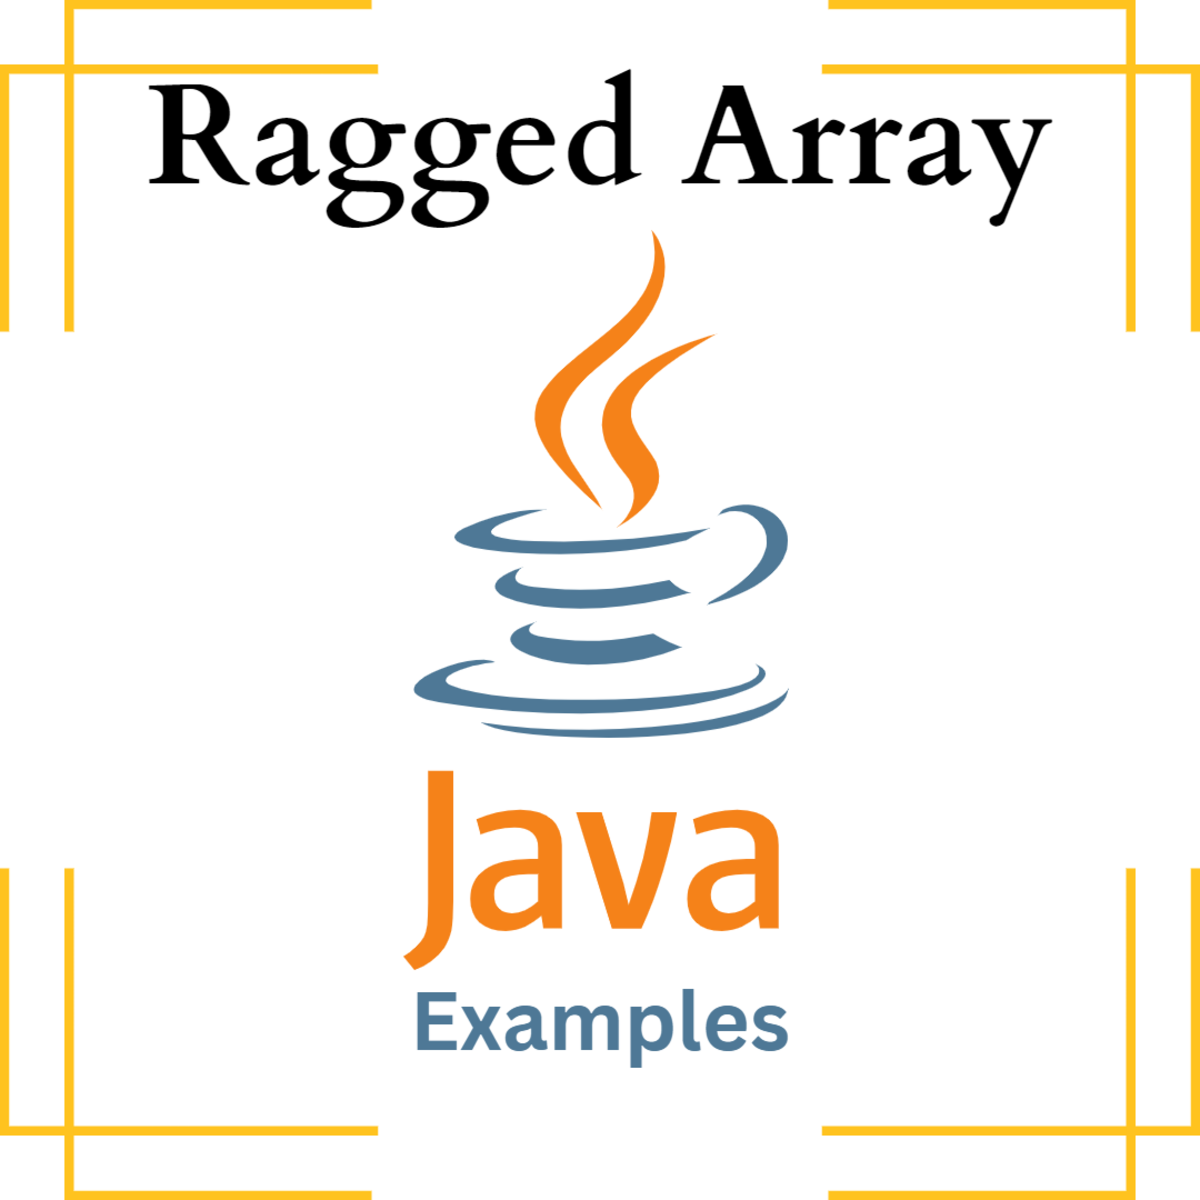 Java Examples: Ragged Array